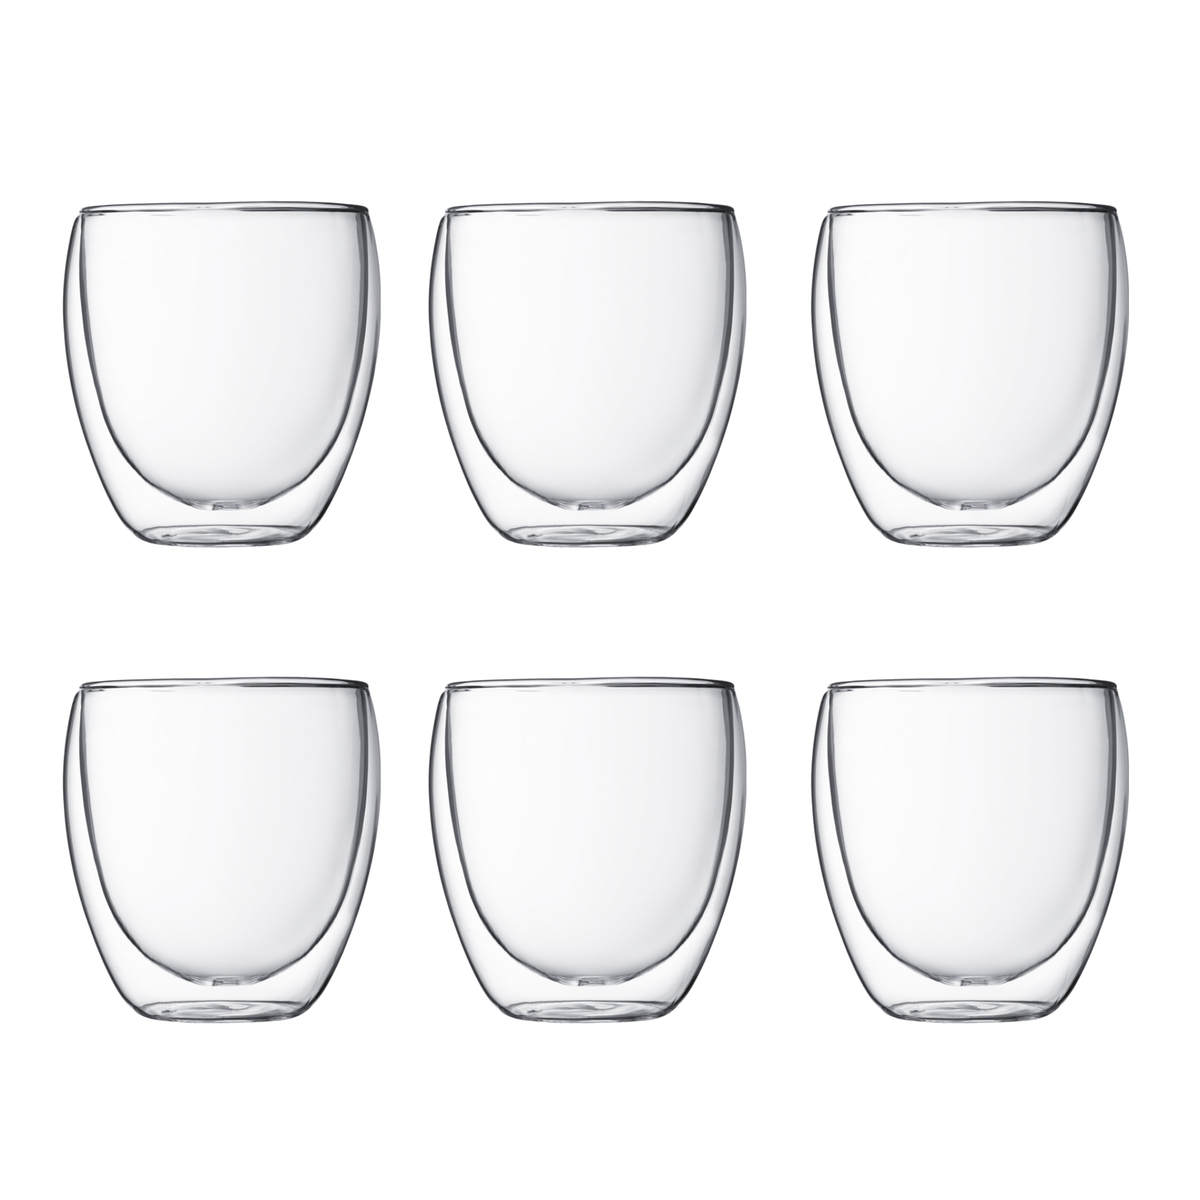 Set of 6 Pavina Double Walled Glasses 25cl / 0.25L